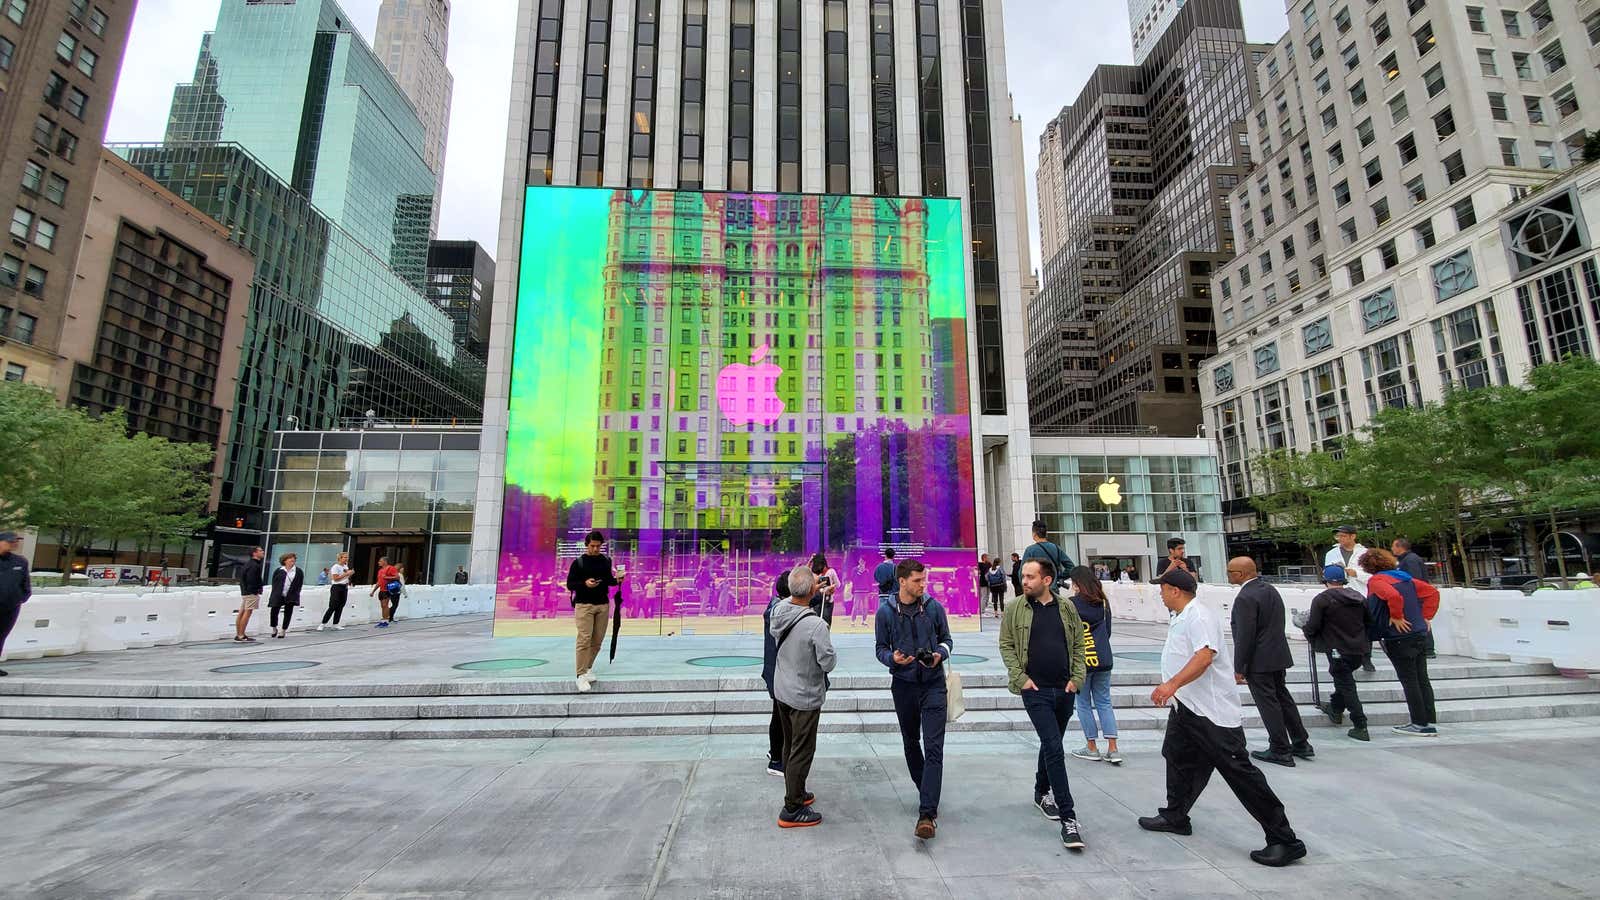 The new Apple store on Fifth Avenue.